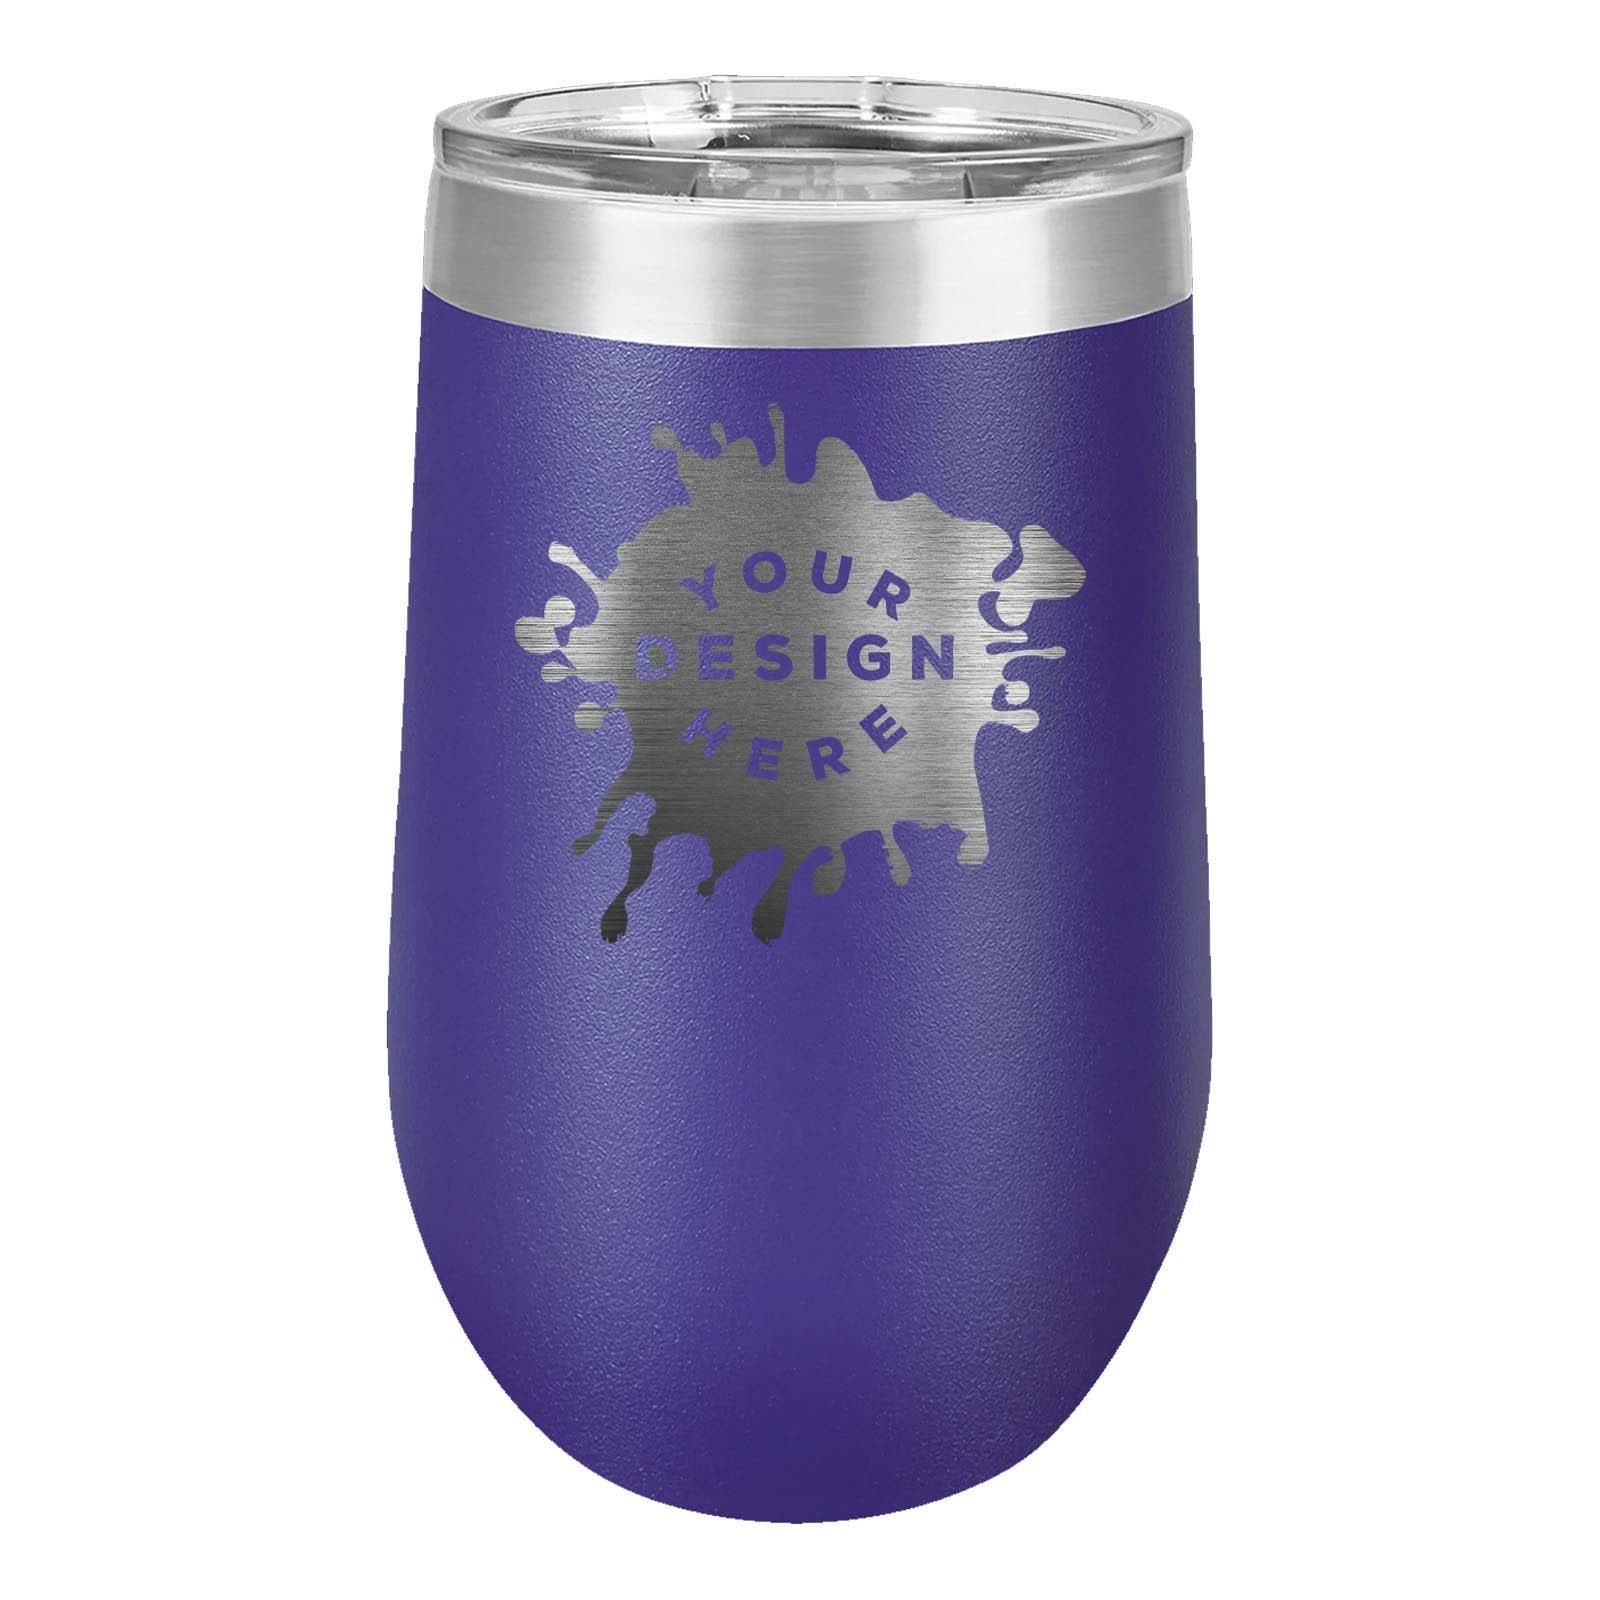 YETI WINE CUP, YETI STEMLESS WINE CUP,FREE ENGRAVING, STAINLESS